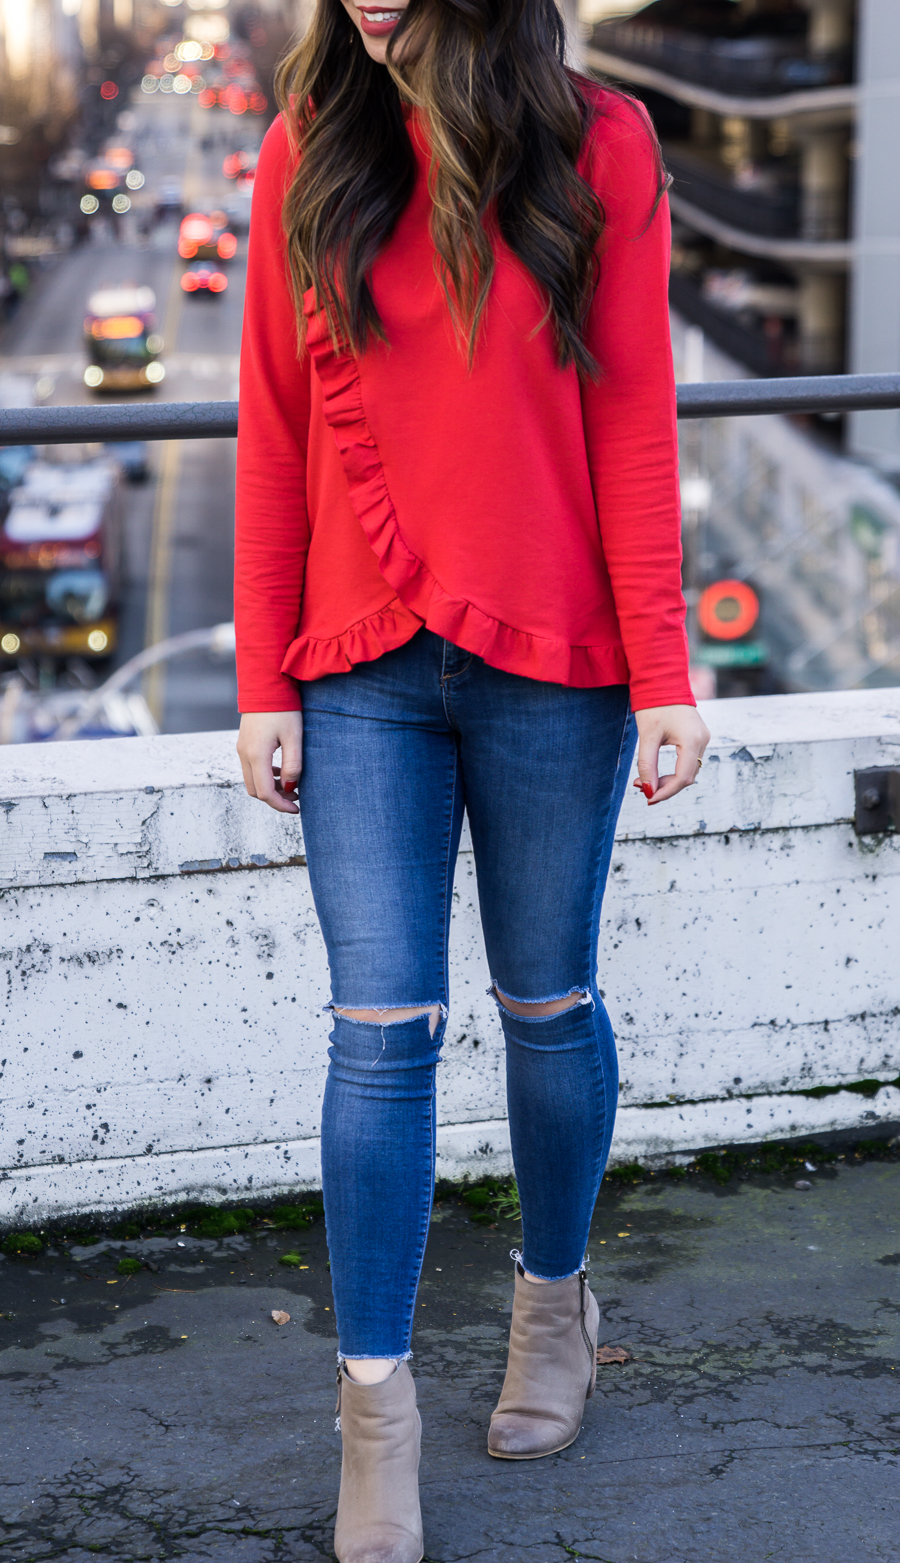 Red ruffle top, casual Valentine's Day outfit, casual style, Seattle fashion blogger